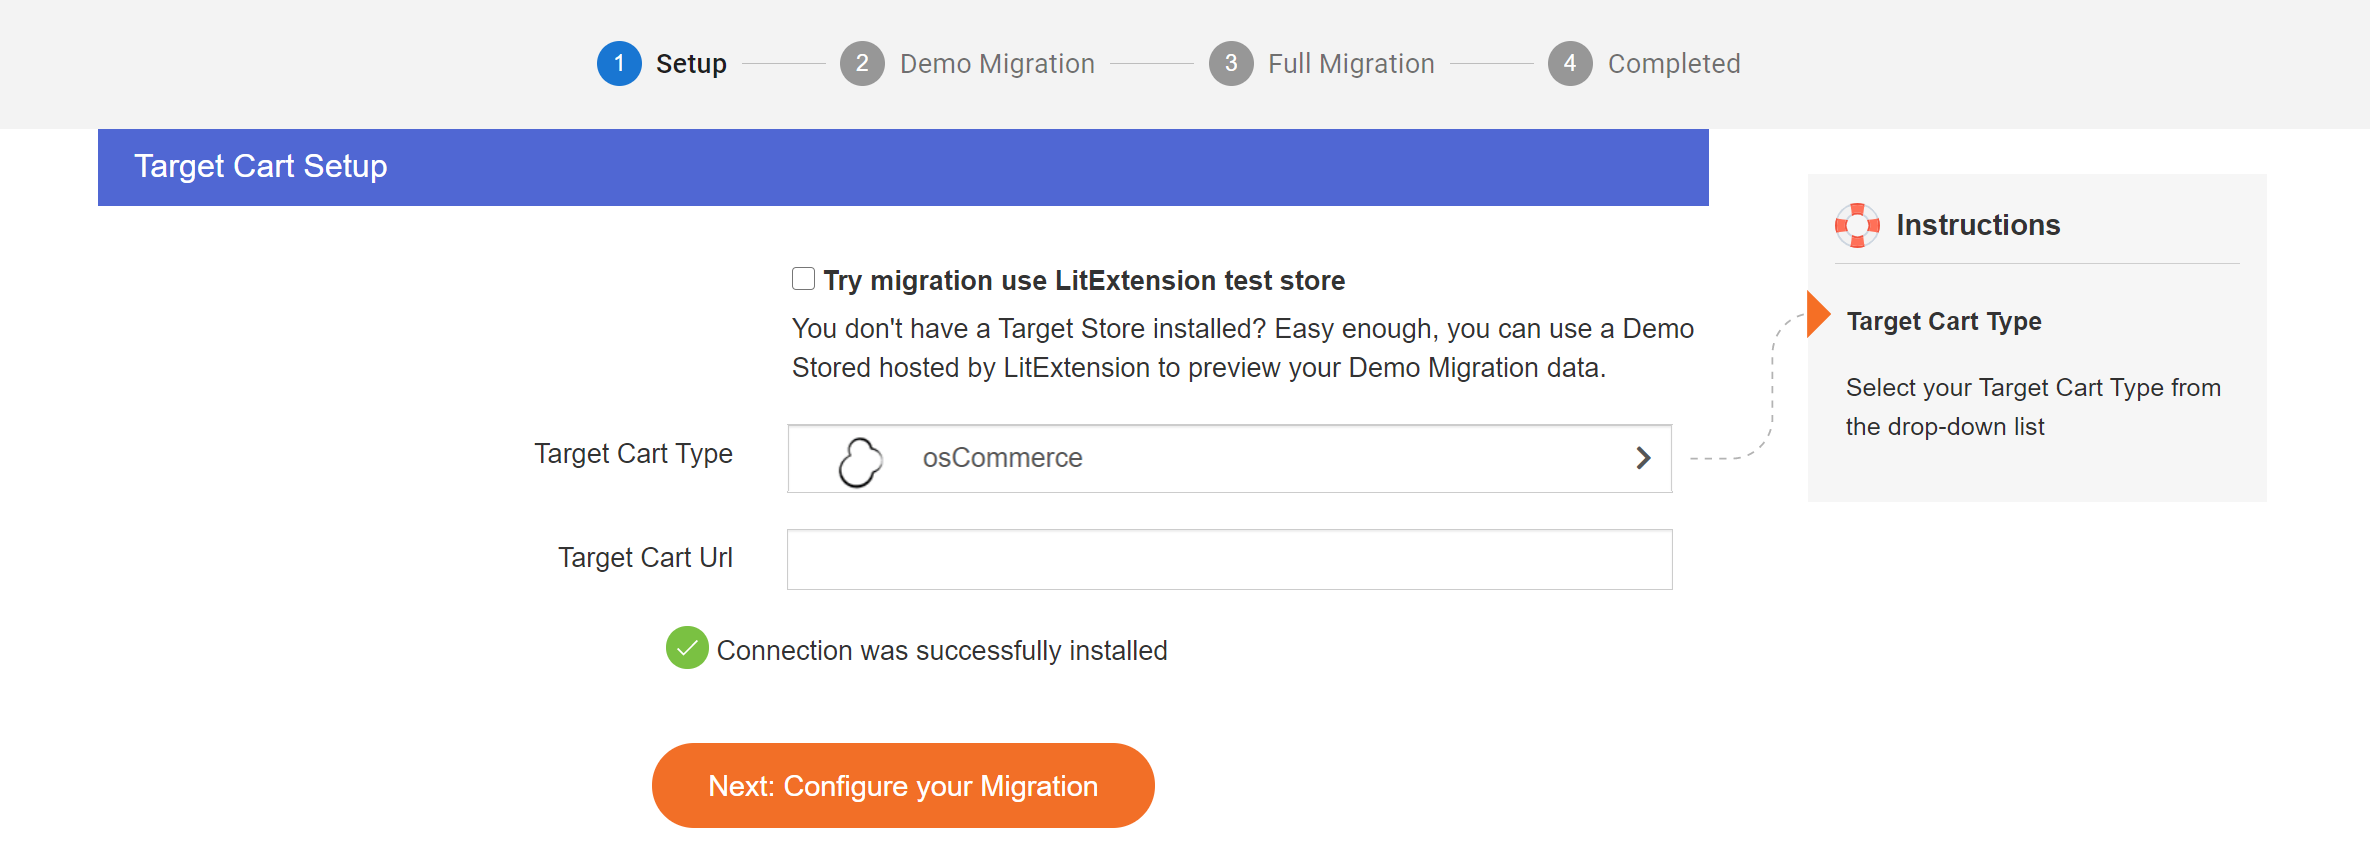 Migrate to osCommerce